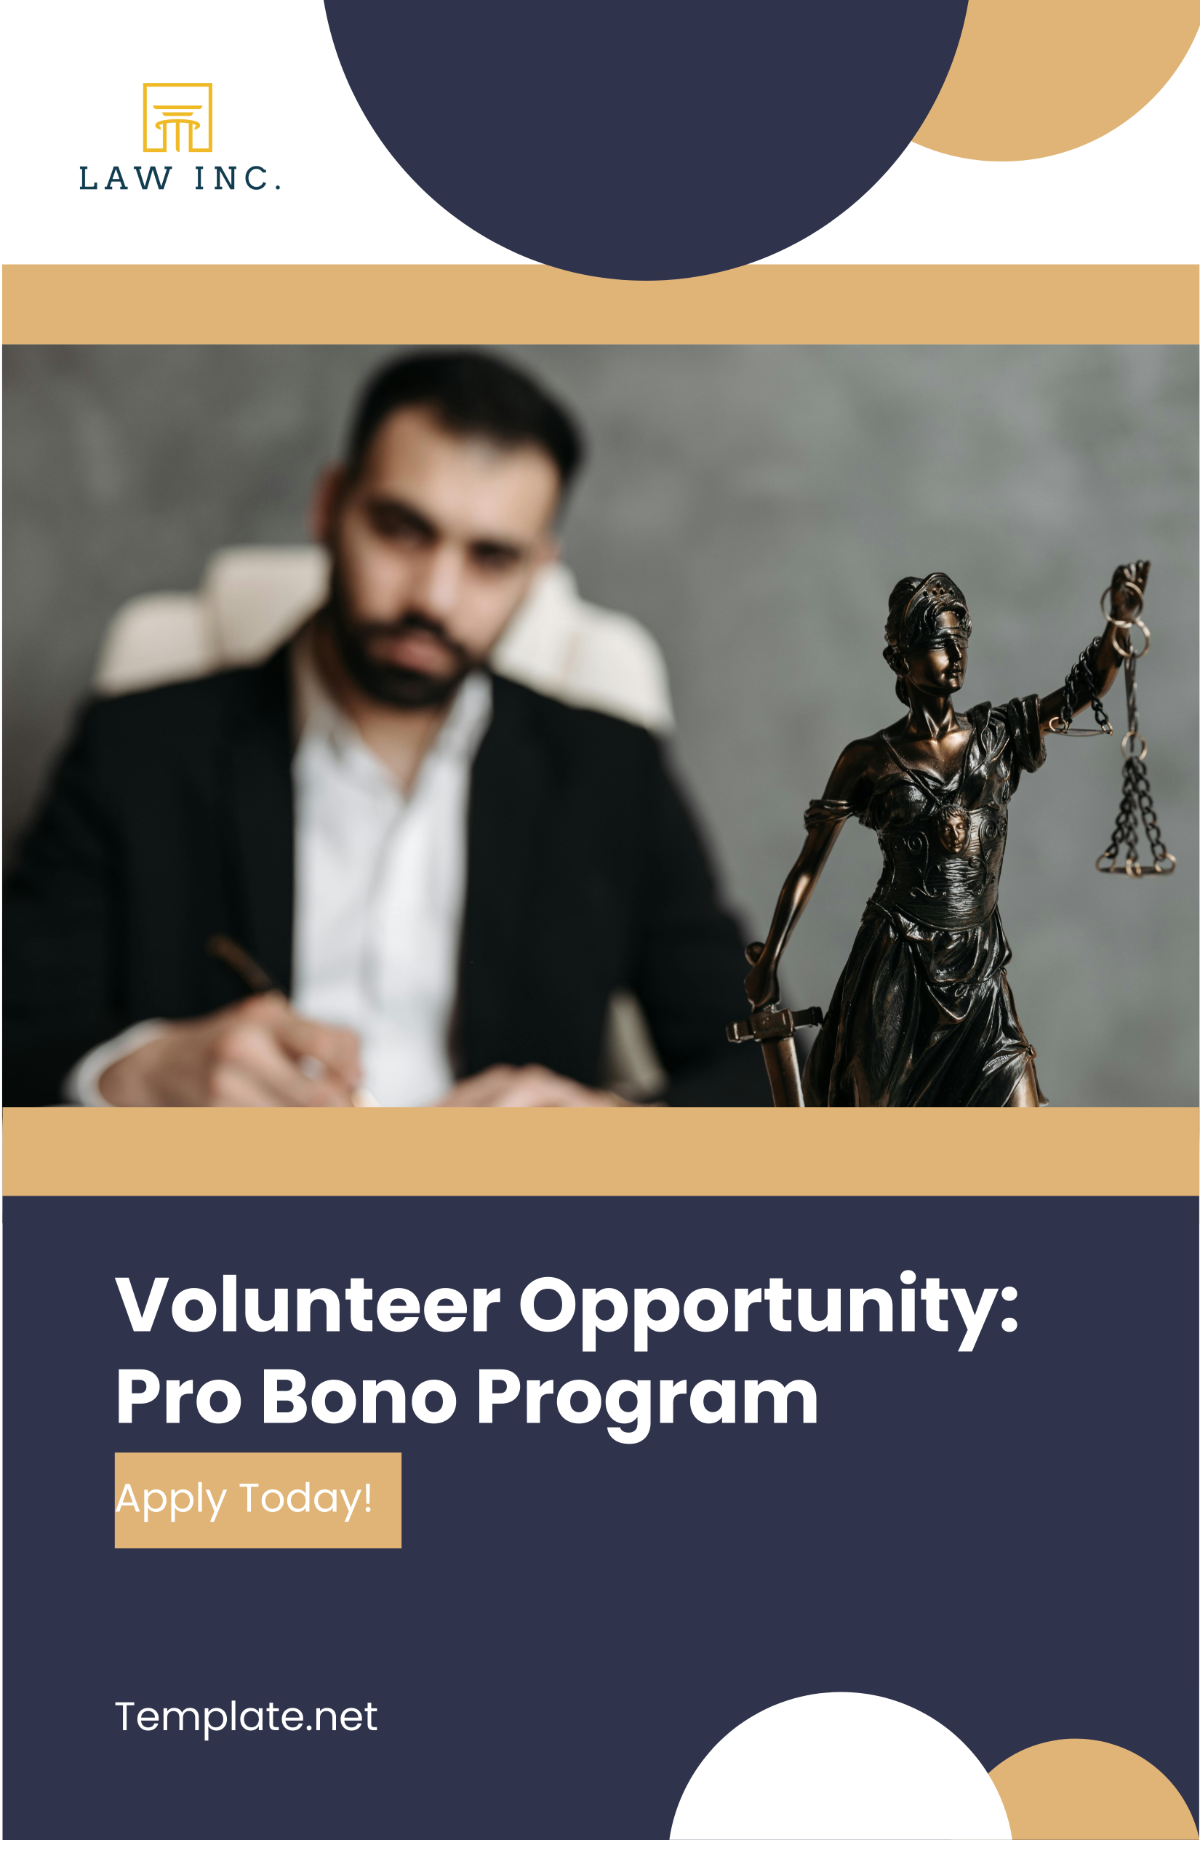 Law Firm Volunteer Opportunity Poster Template